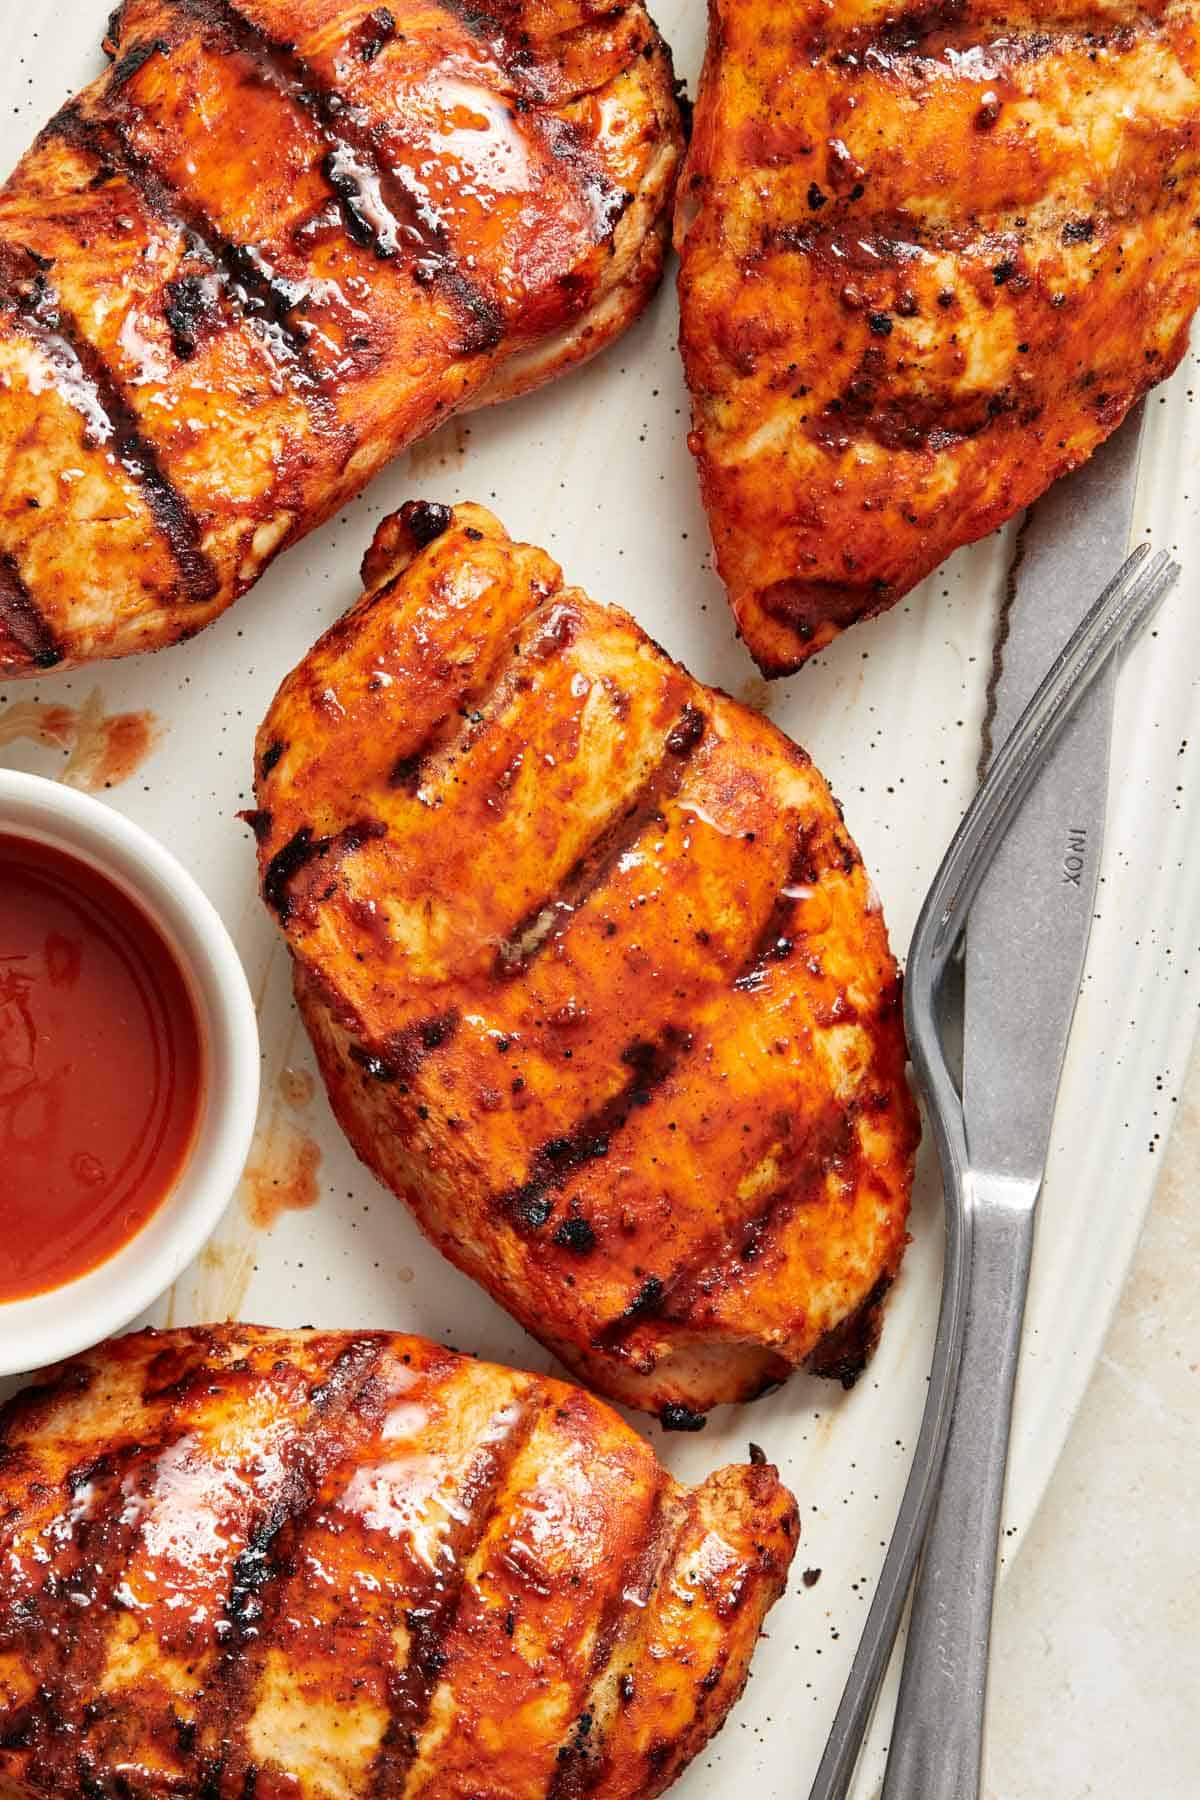 Overhead view of a focused view of a grilled buffalo chicken breast on a platter with more.